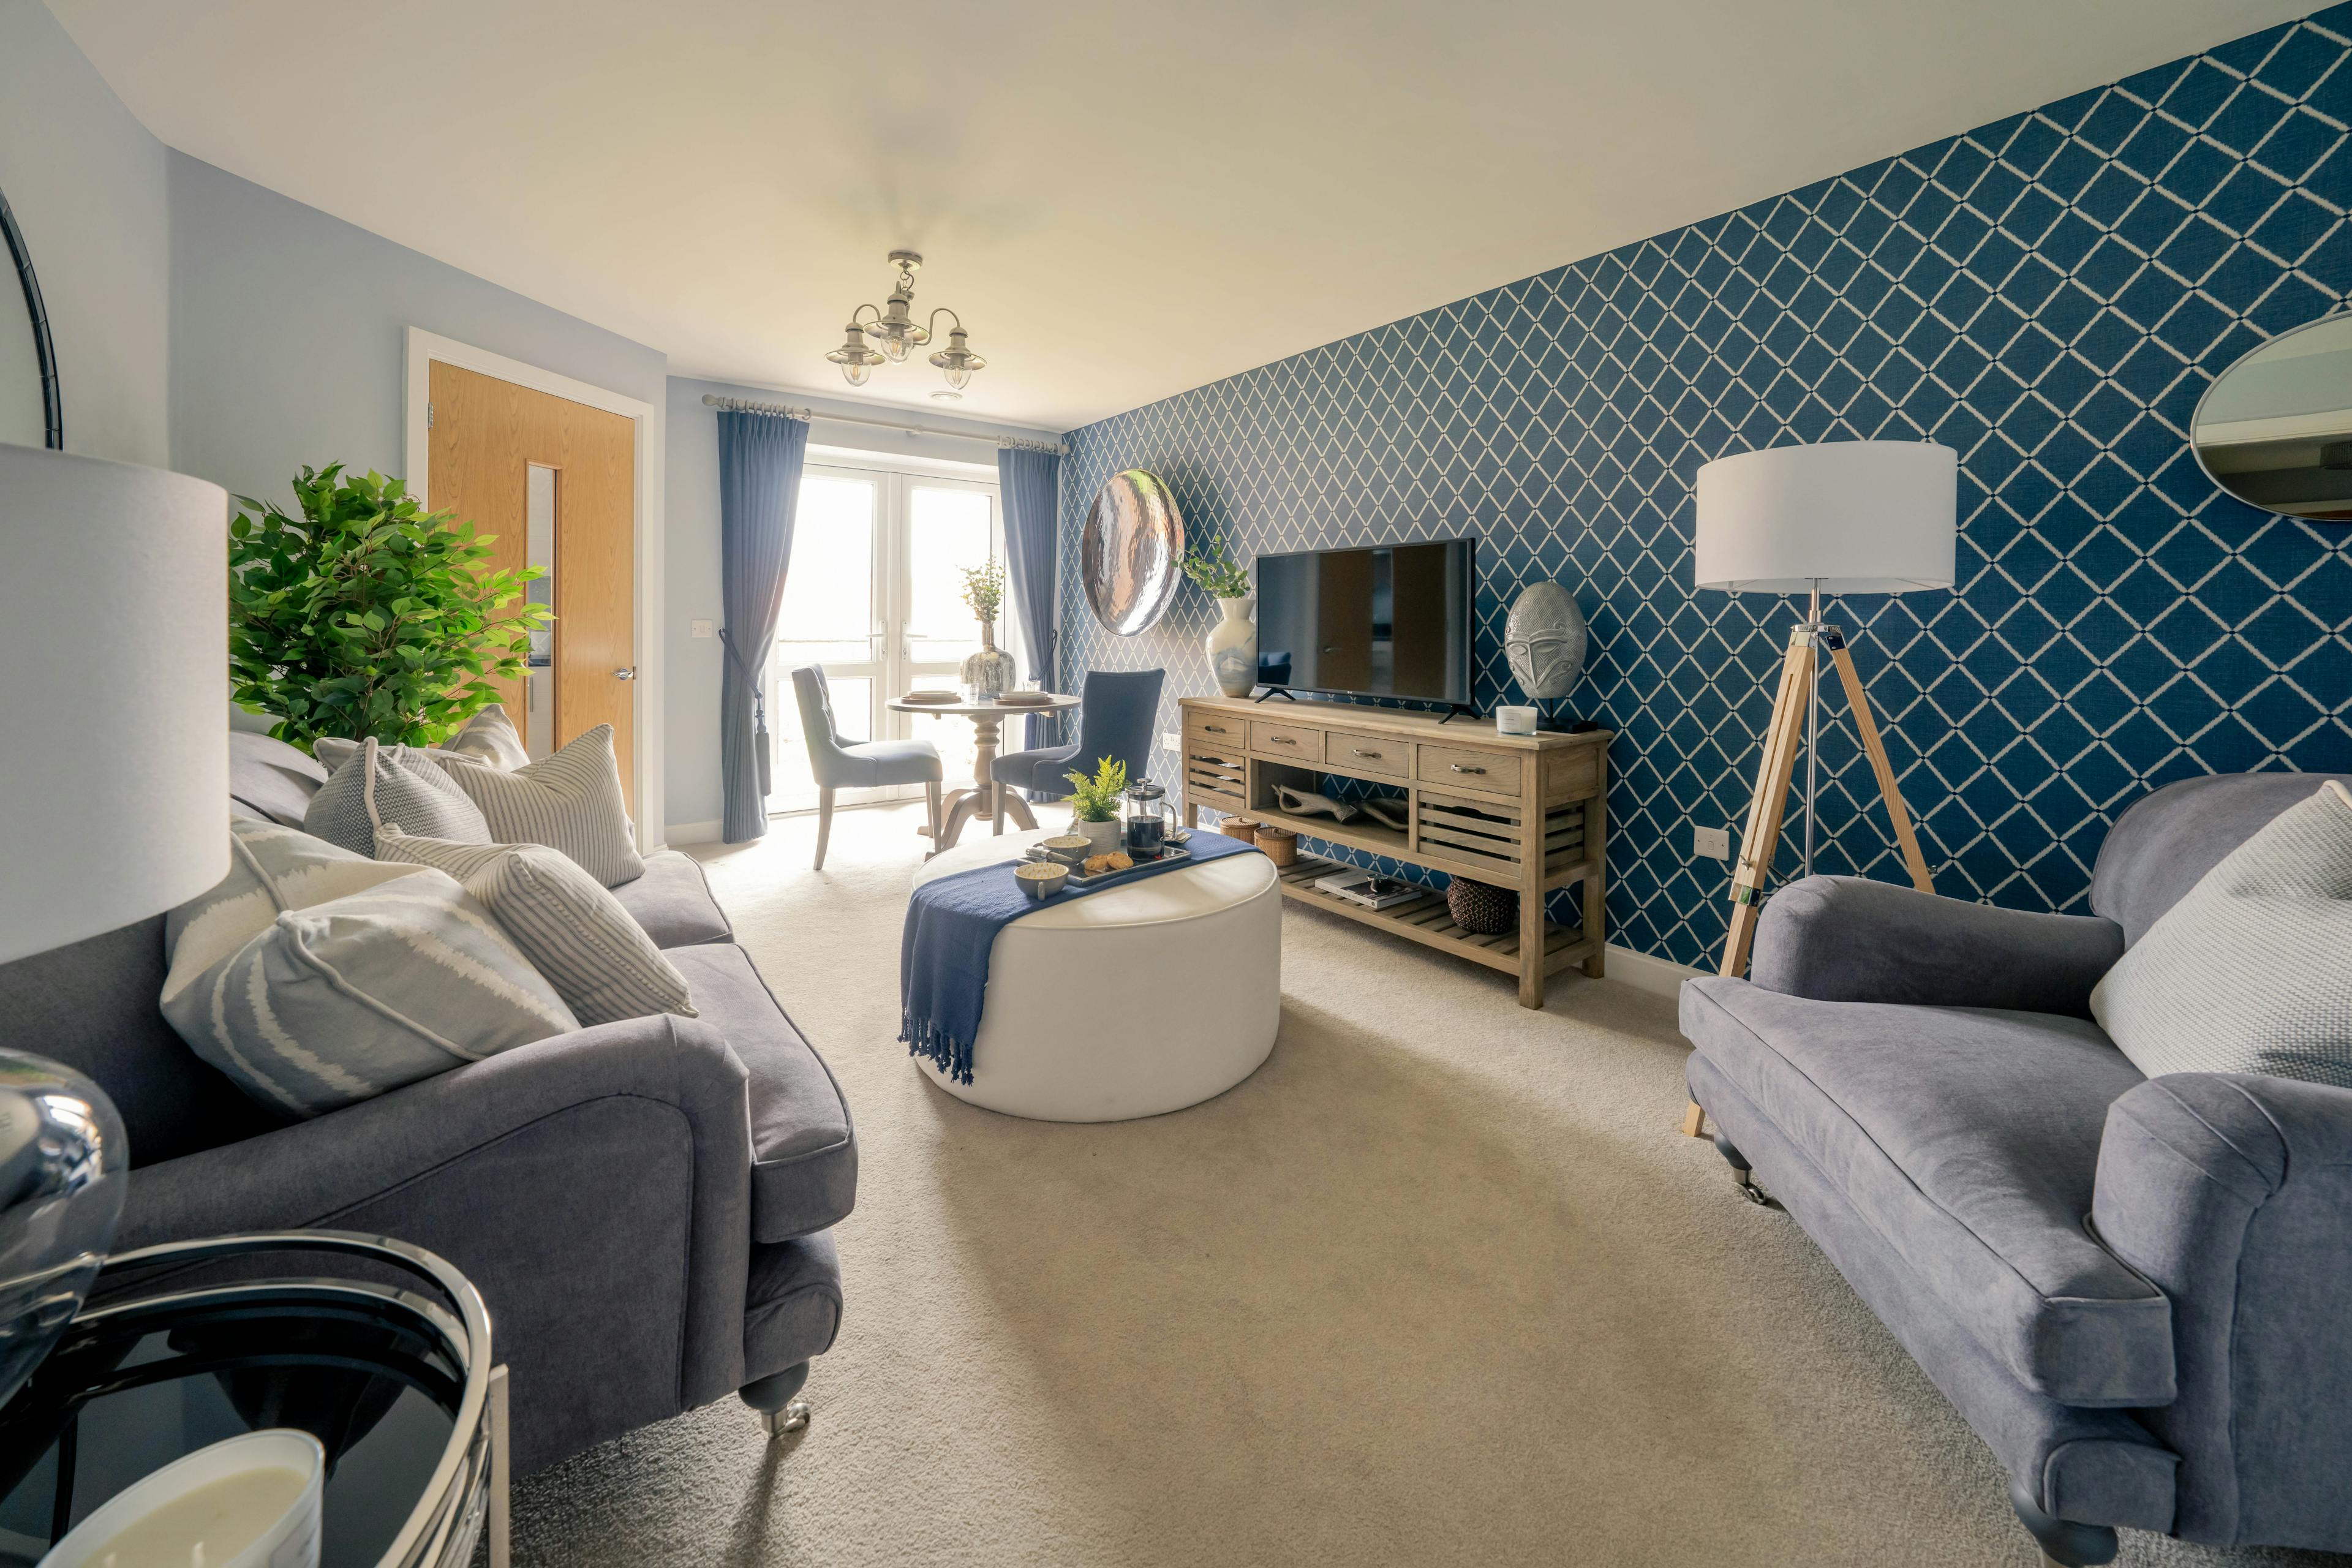 Living Room at Clayton Court Retirement Development in Burgess-hill, Mid Sussex